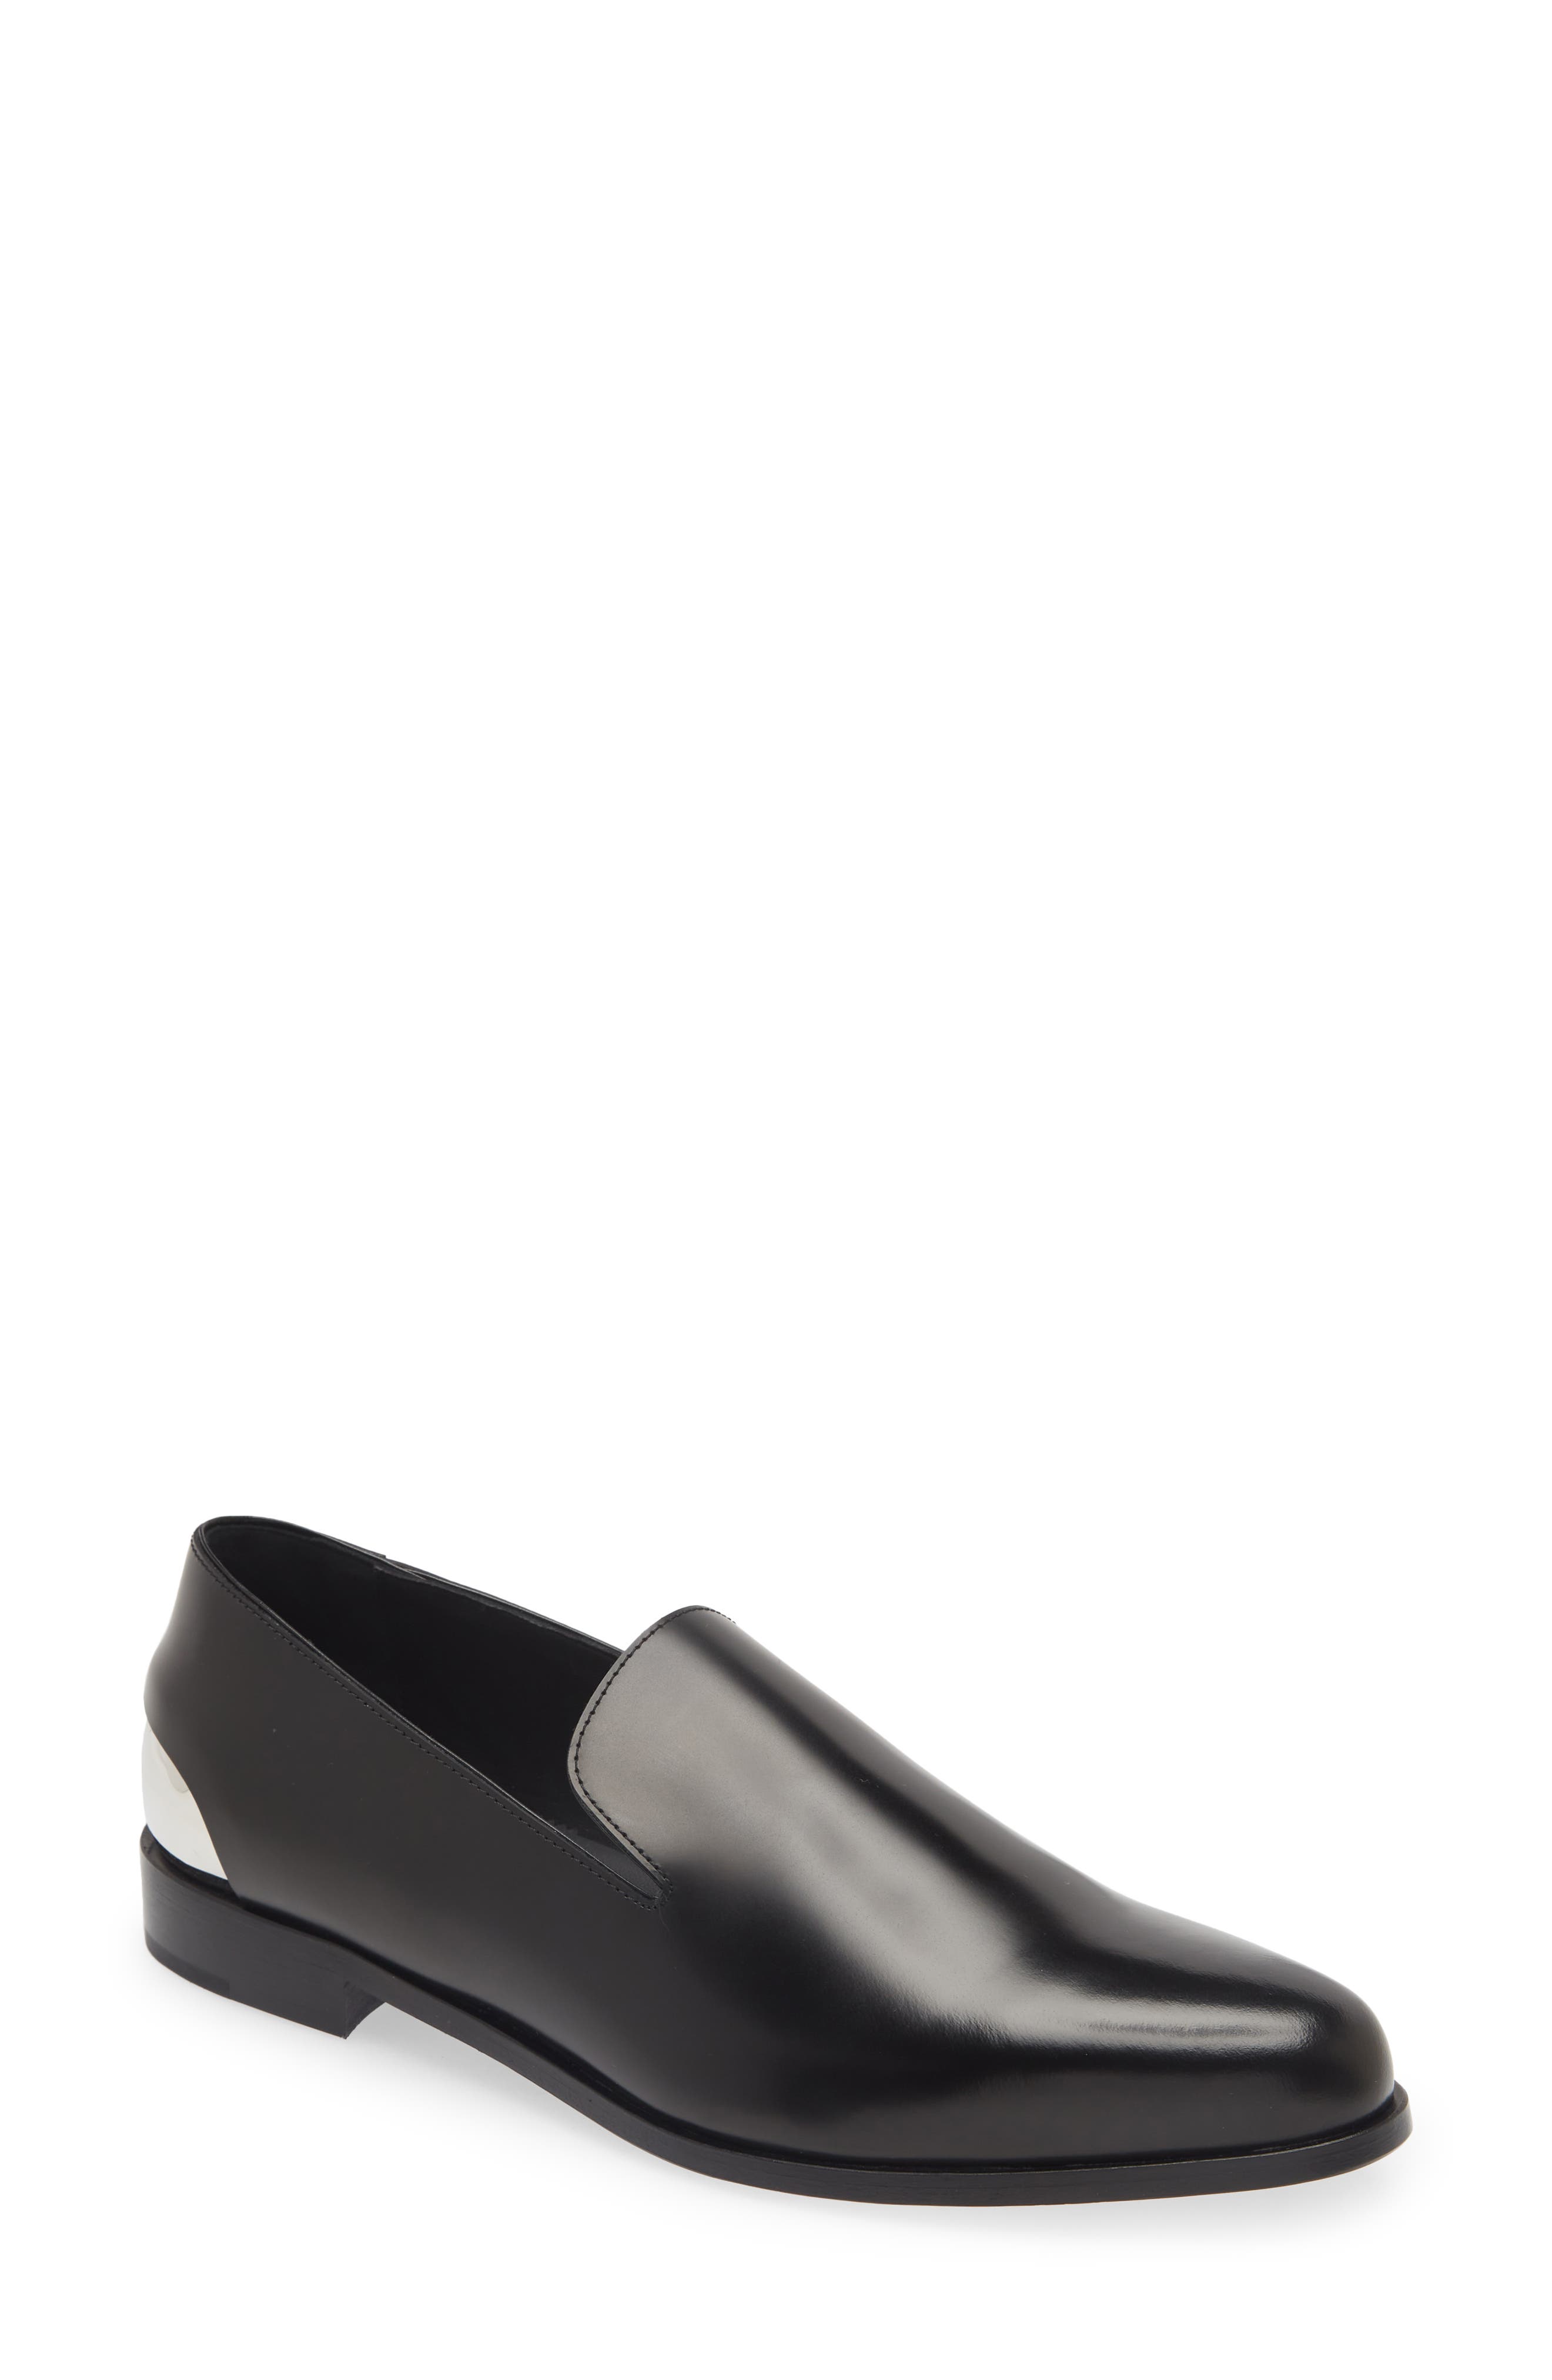 Alexander McQueen patent leather loafers - Black